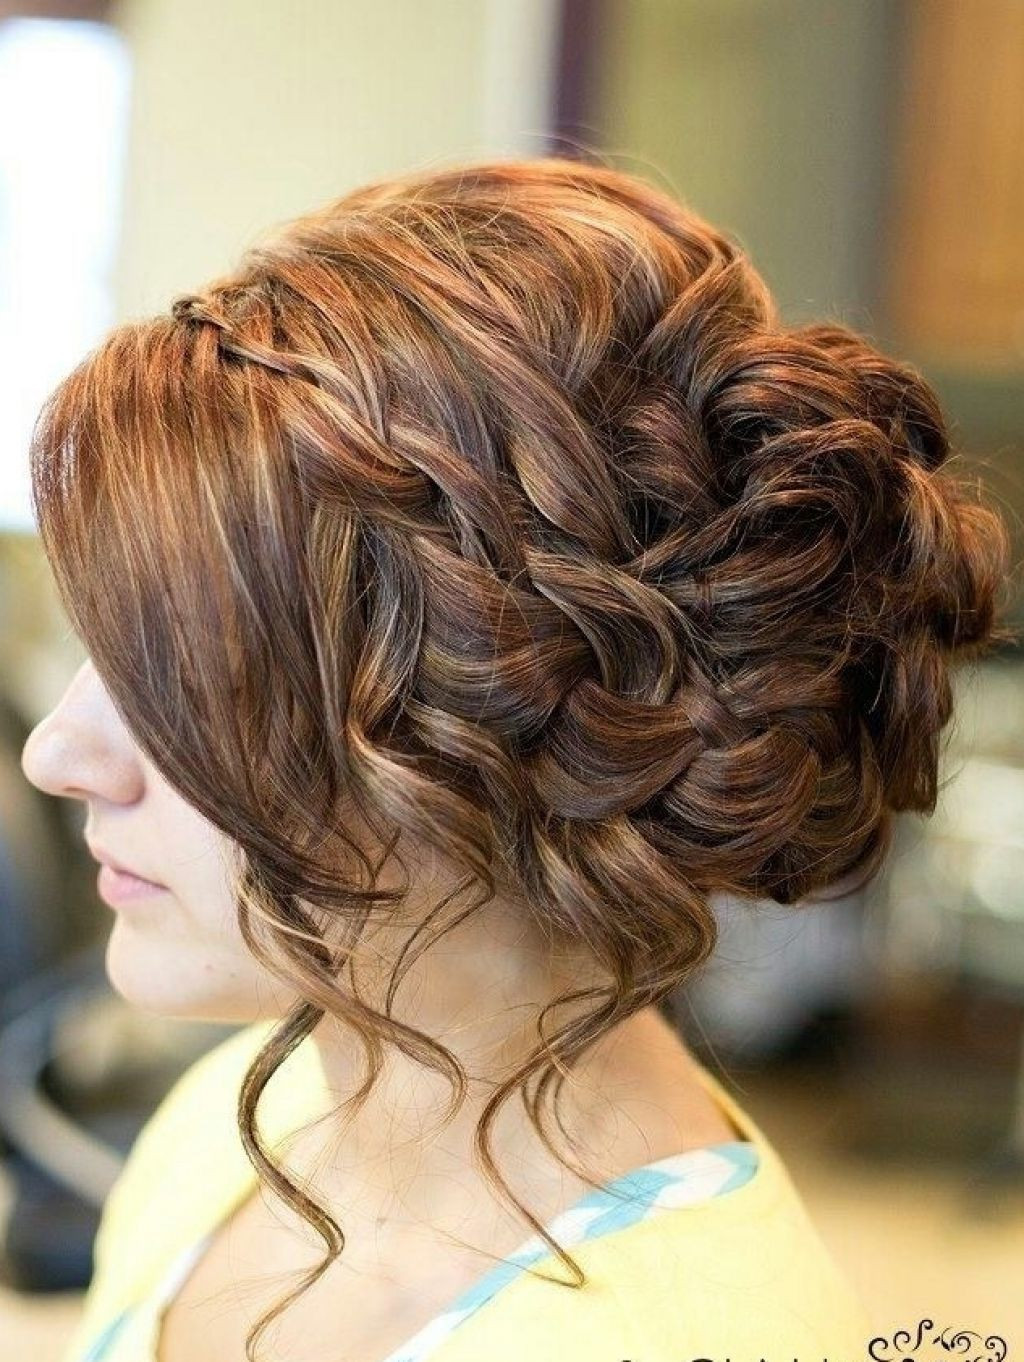 Prom Hairstyles Bun
 14 Prom Hairstyles for Long Hair that are Simply Adorable